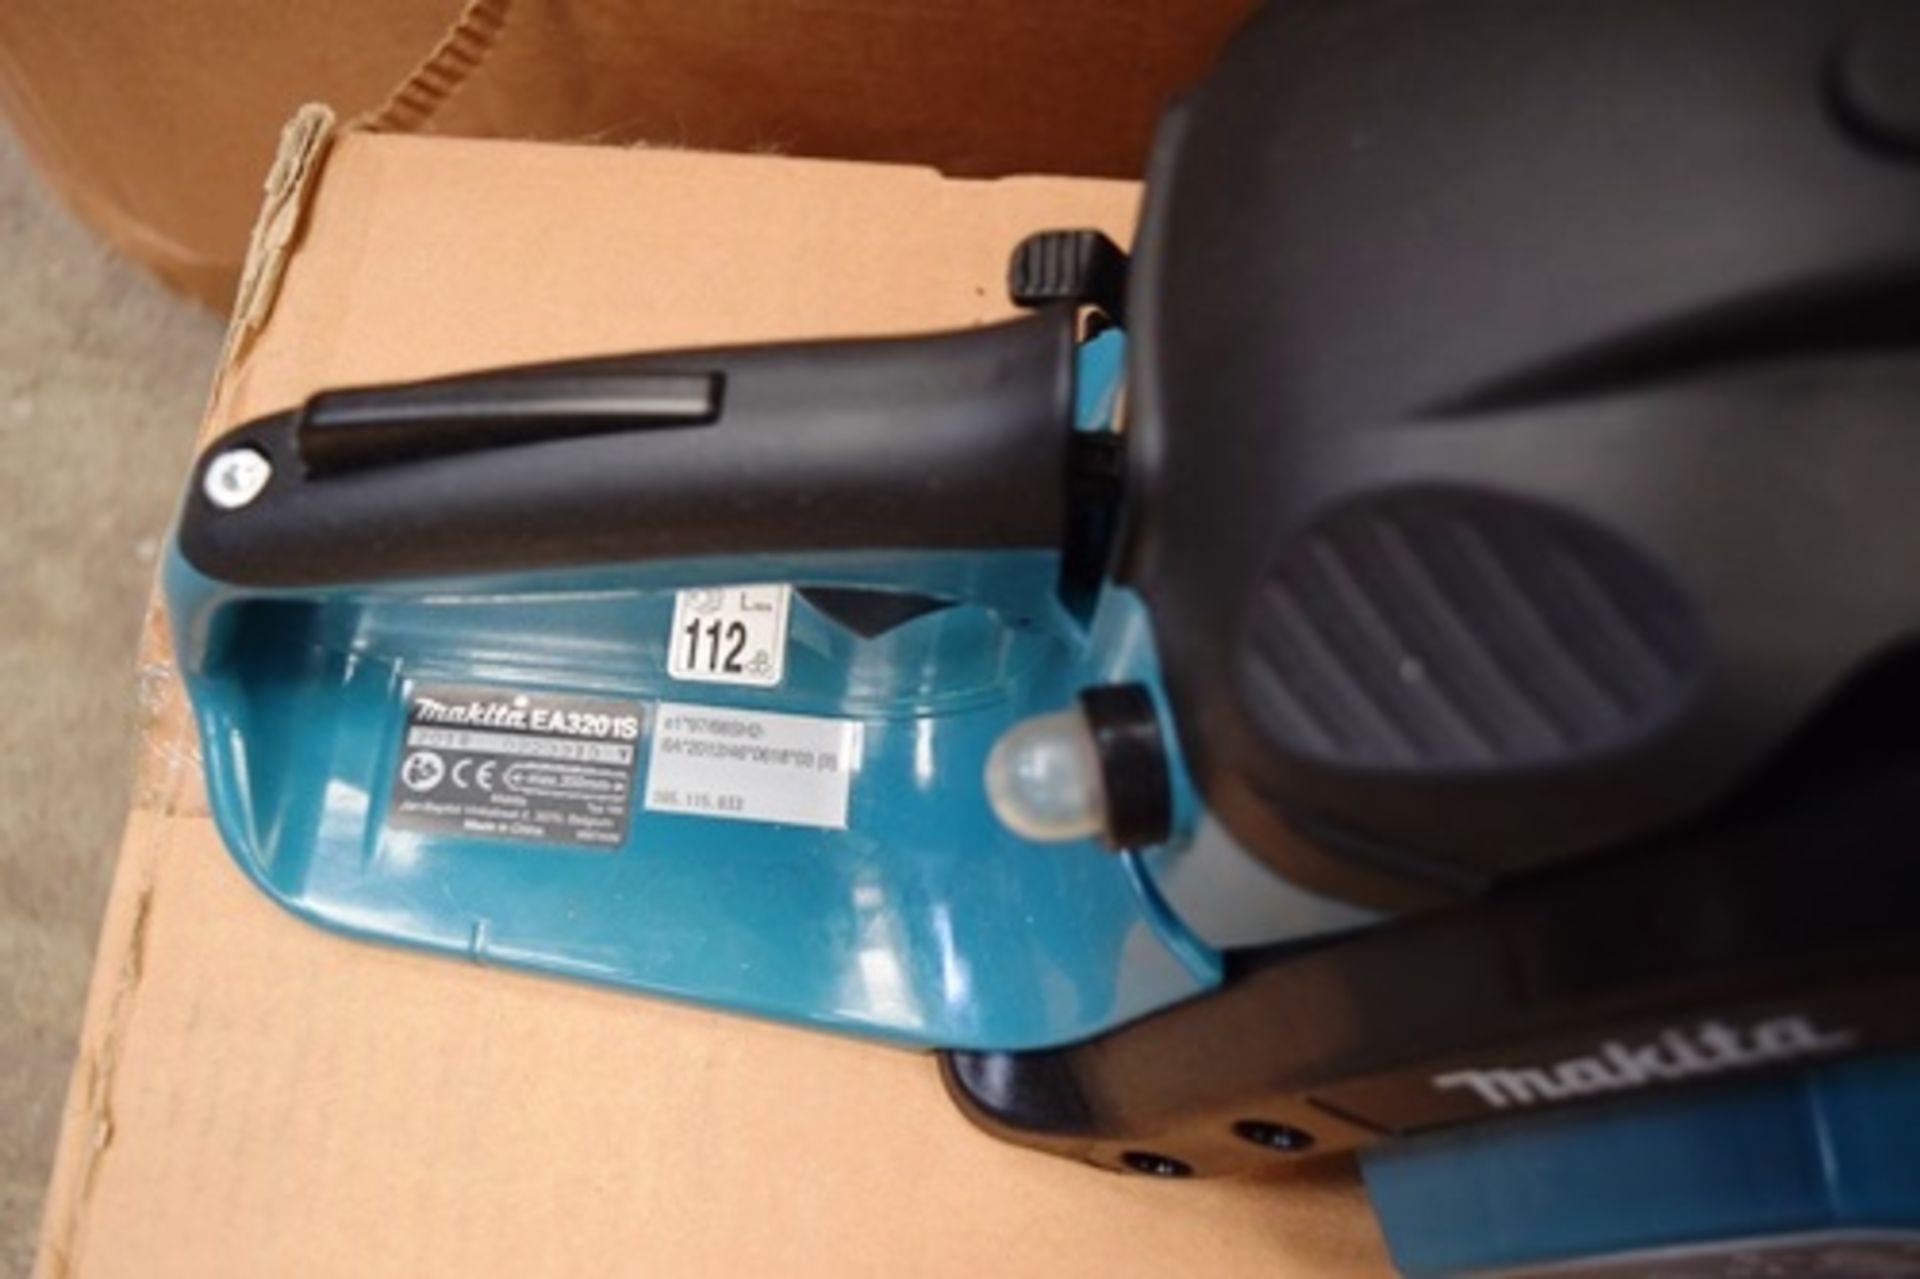 1 x Makita petrol chain saw, model EA3201S, Y.O.M. 2018, with guide, chain, manual and box - - Image 2 of 5